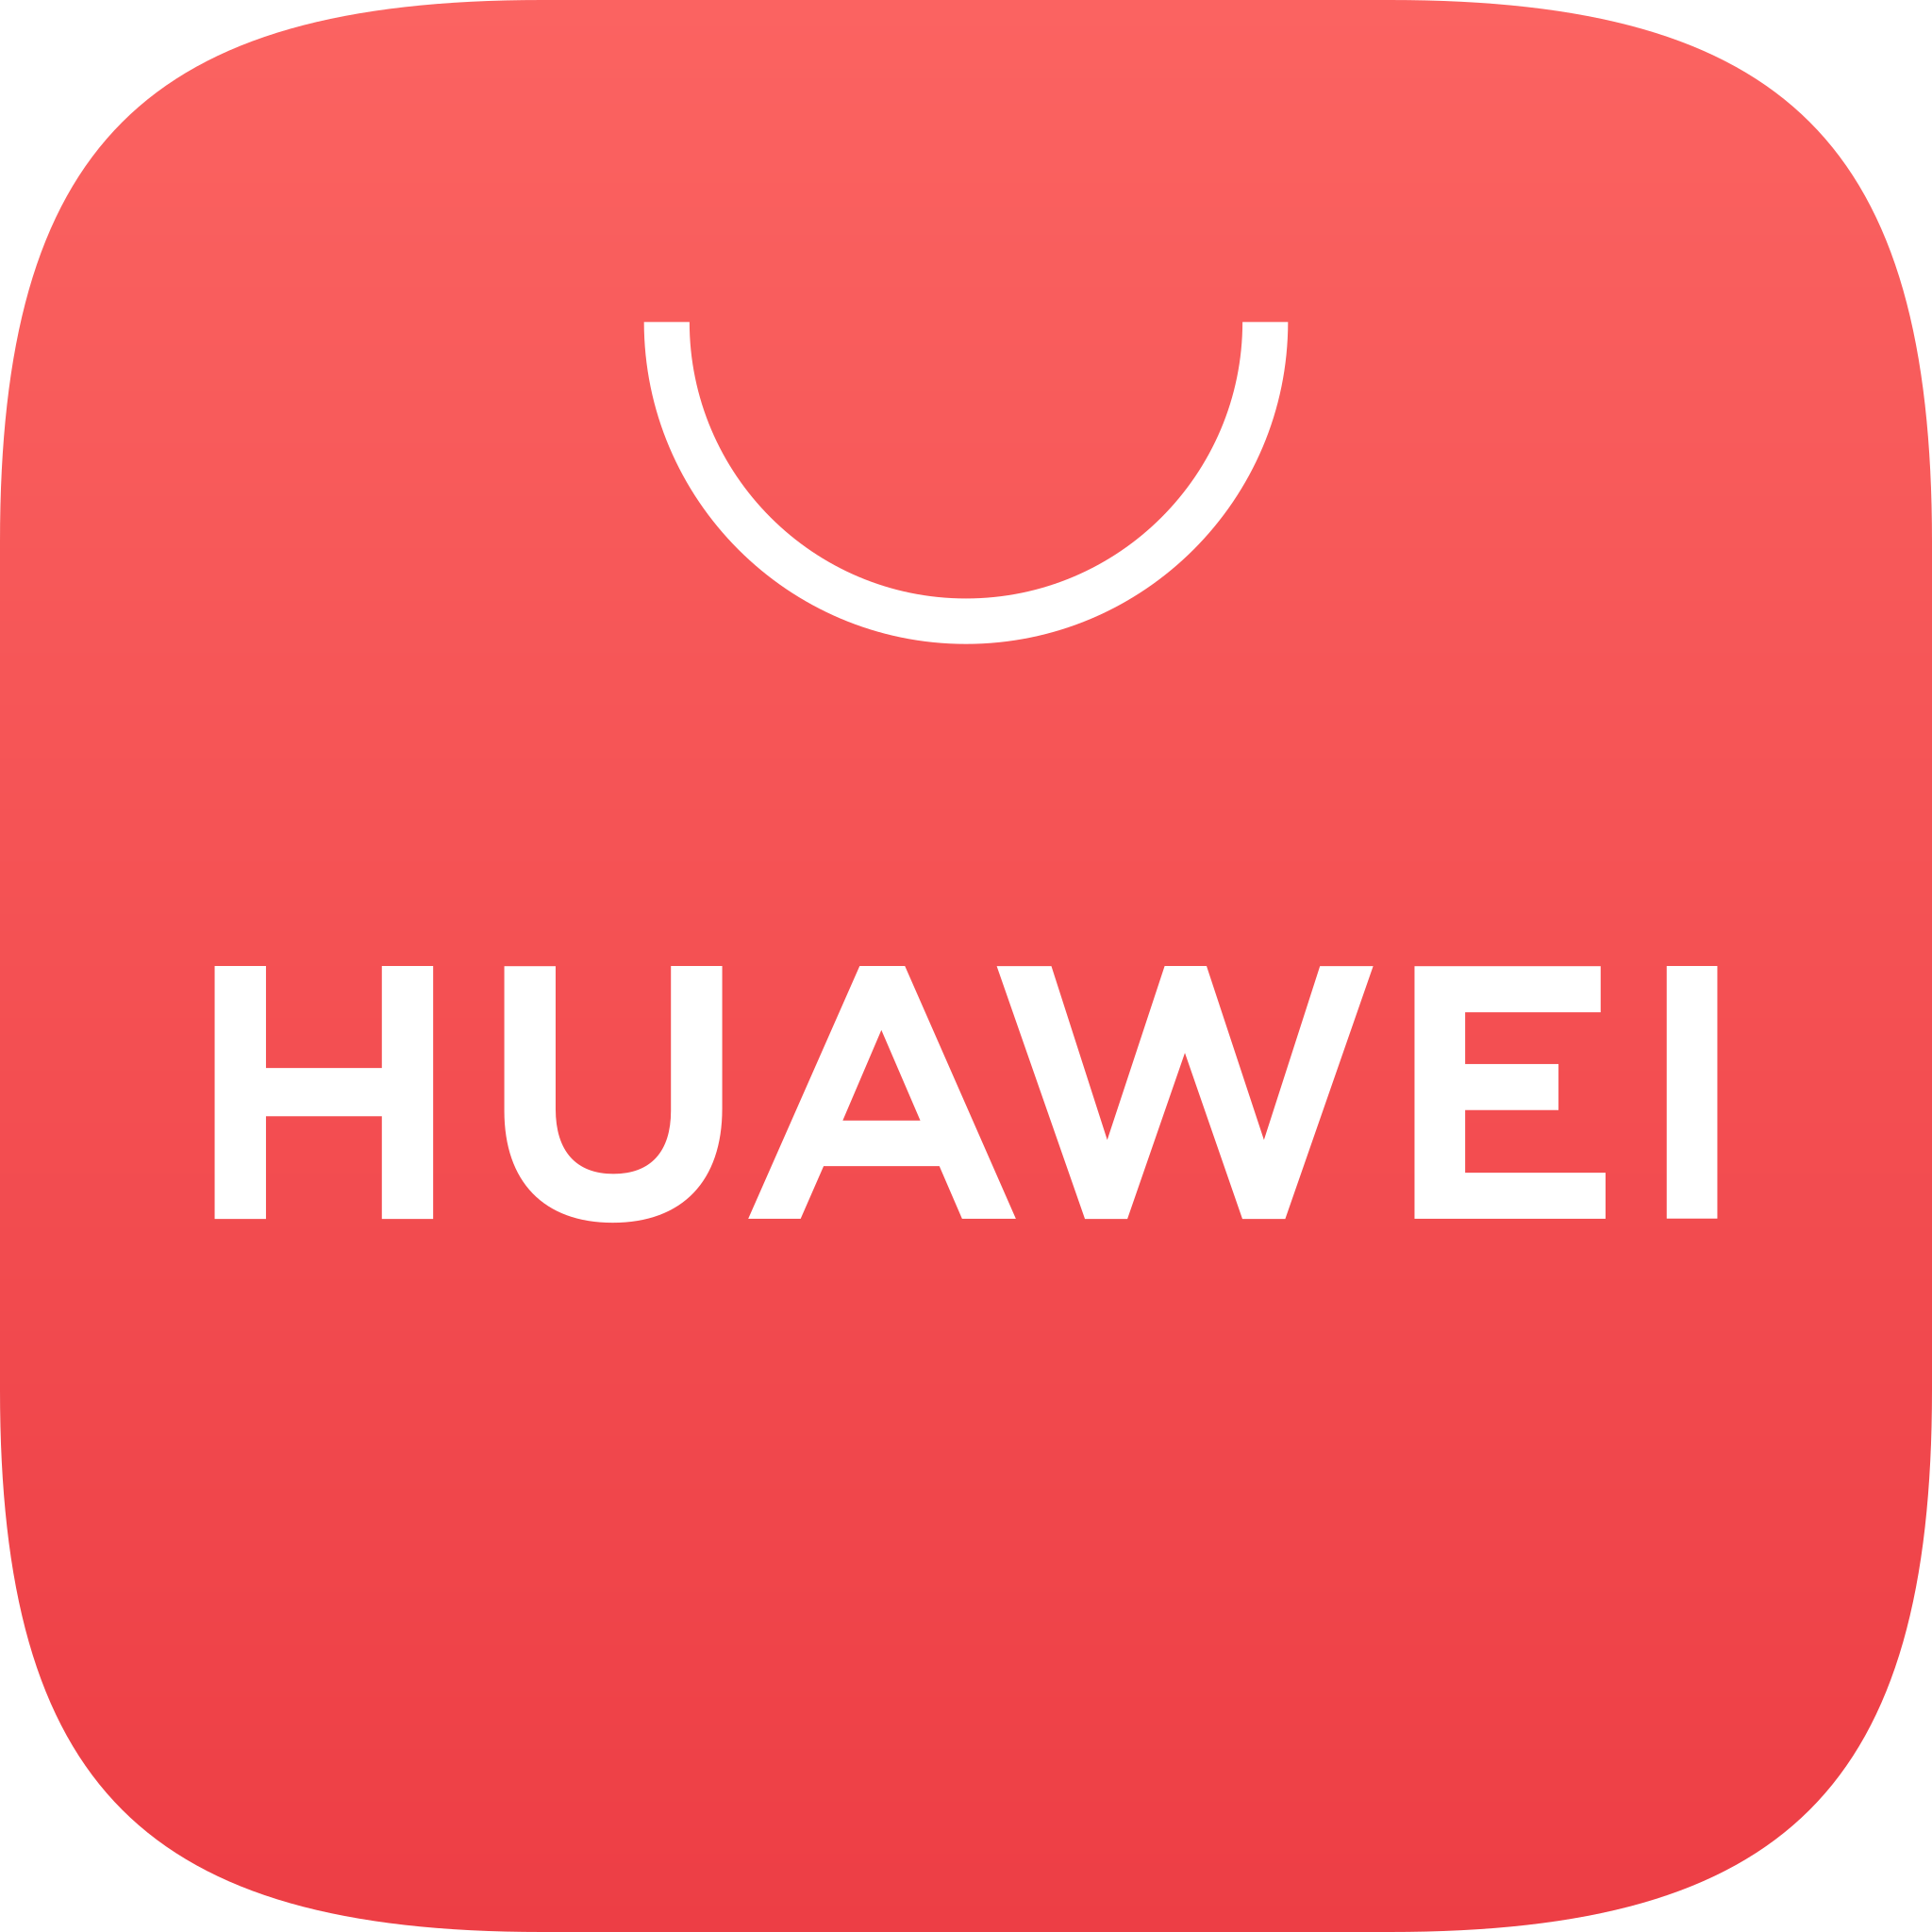 Huawei Logo PNG Vector - FREE Vector Design - Cdr, Ai, EPS, PNG, SVG